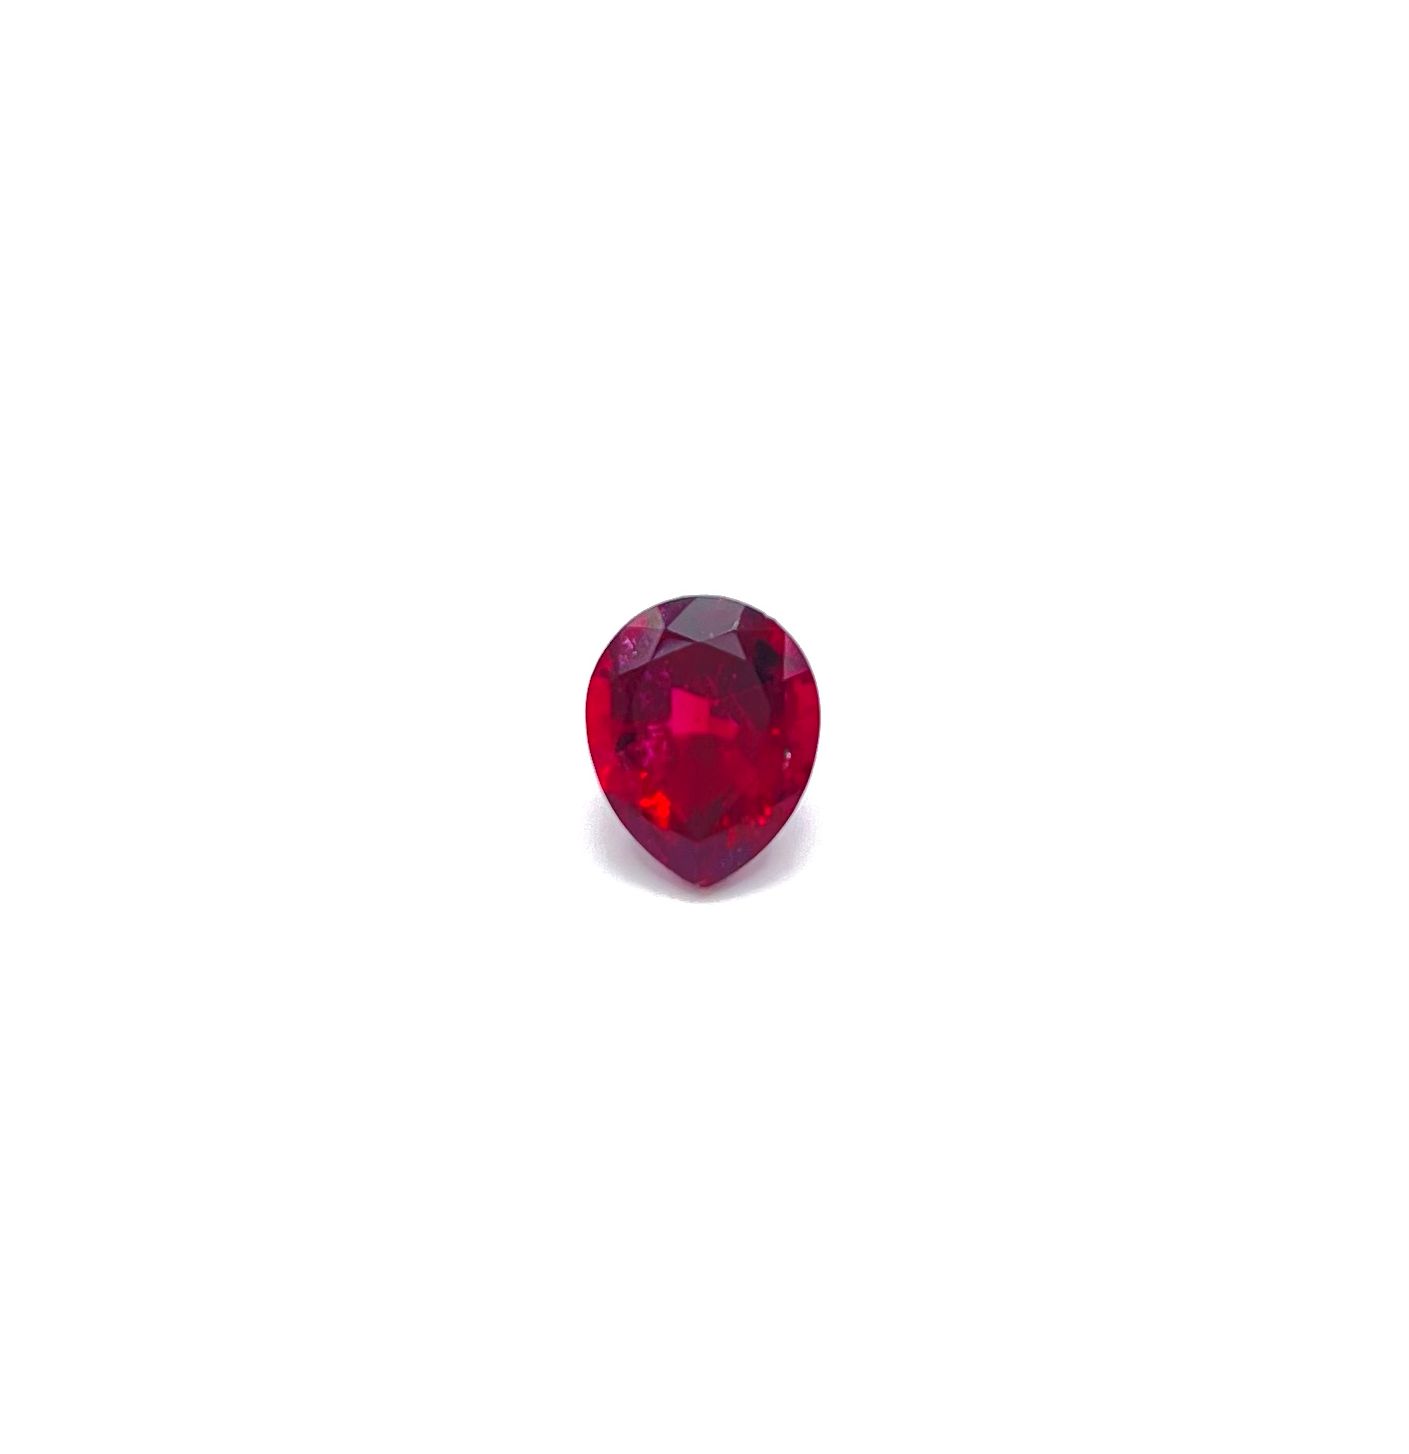 An exceptionally red coloured tourmaline